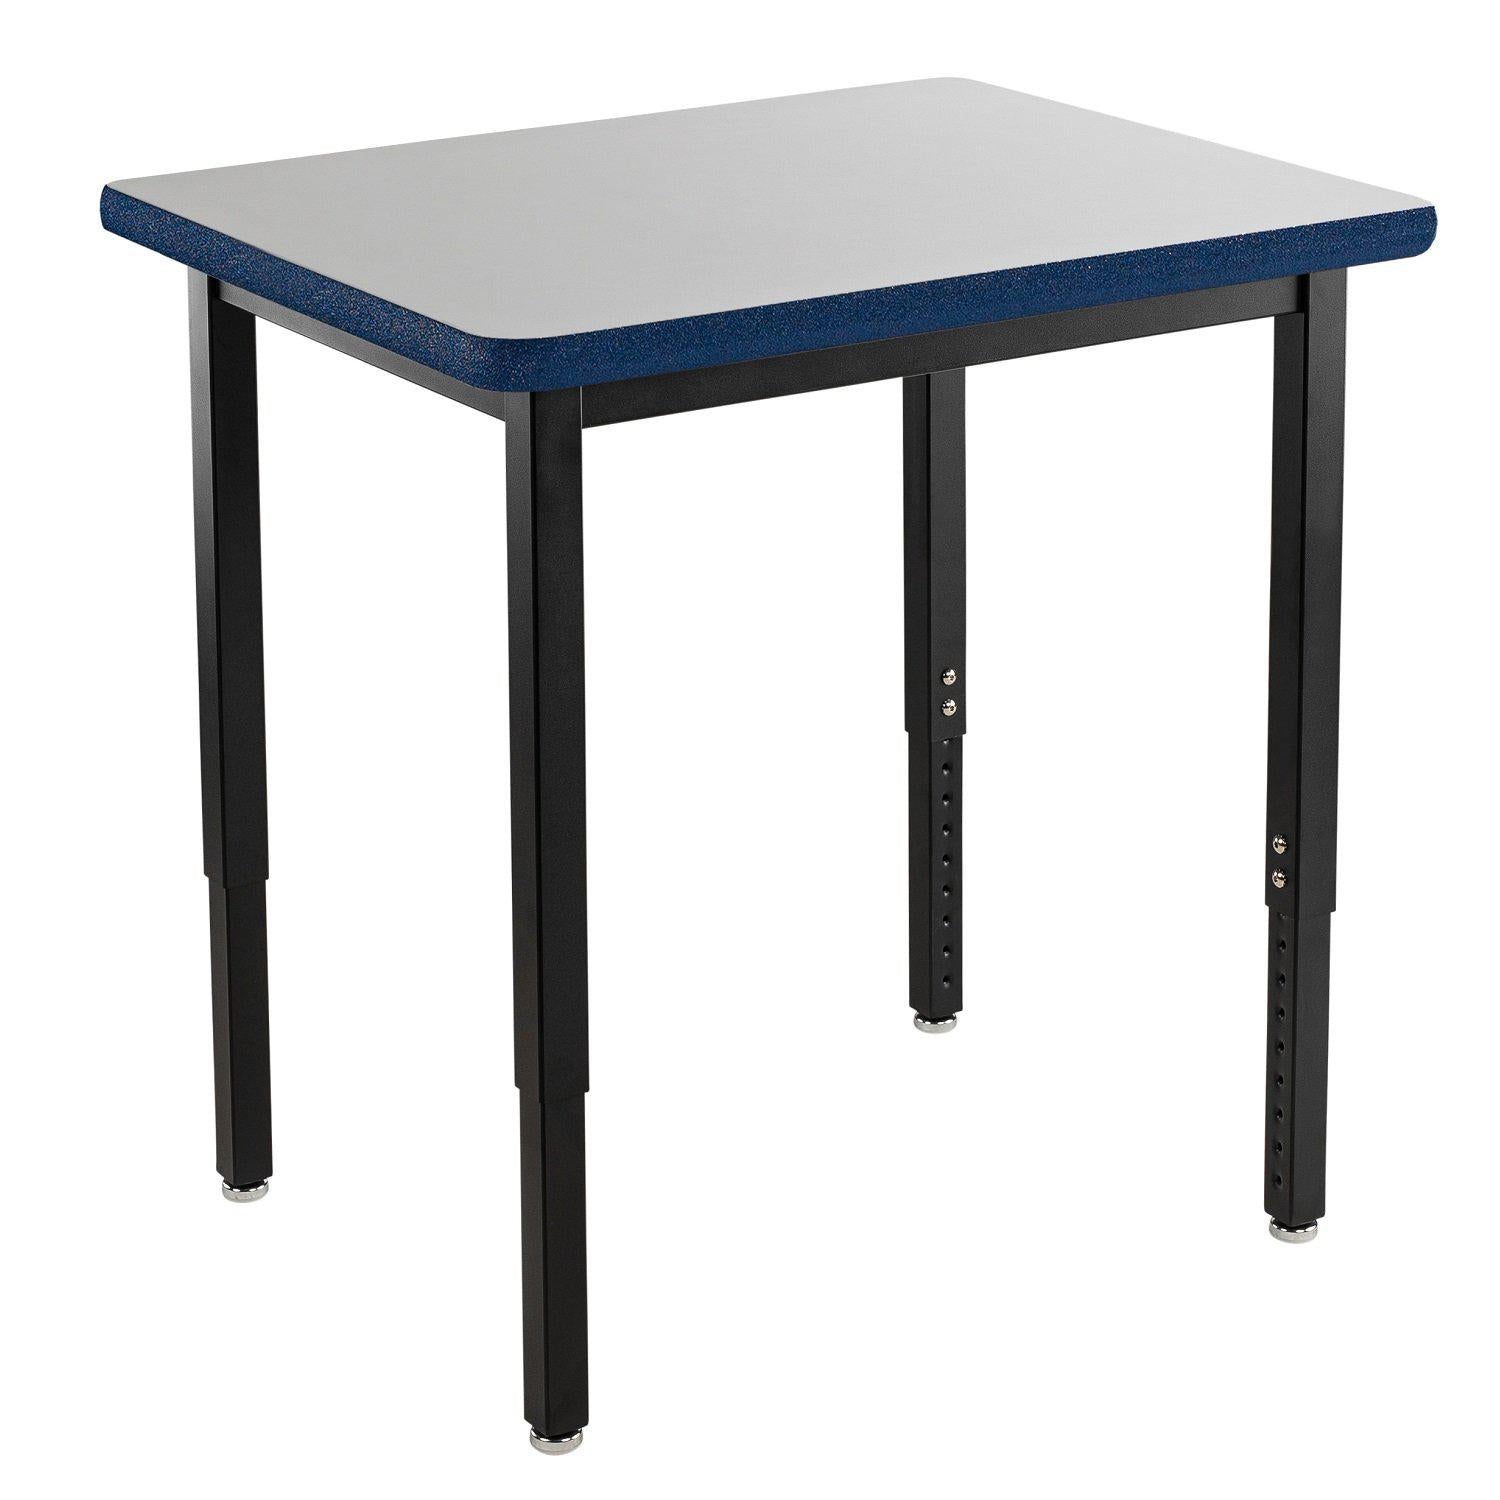 Heavy-Duty Height-Adjustable Utility Table, Black Frame, 24" x 30", Supreme High-Pressure Laminate Top with Black ProtectEdge